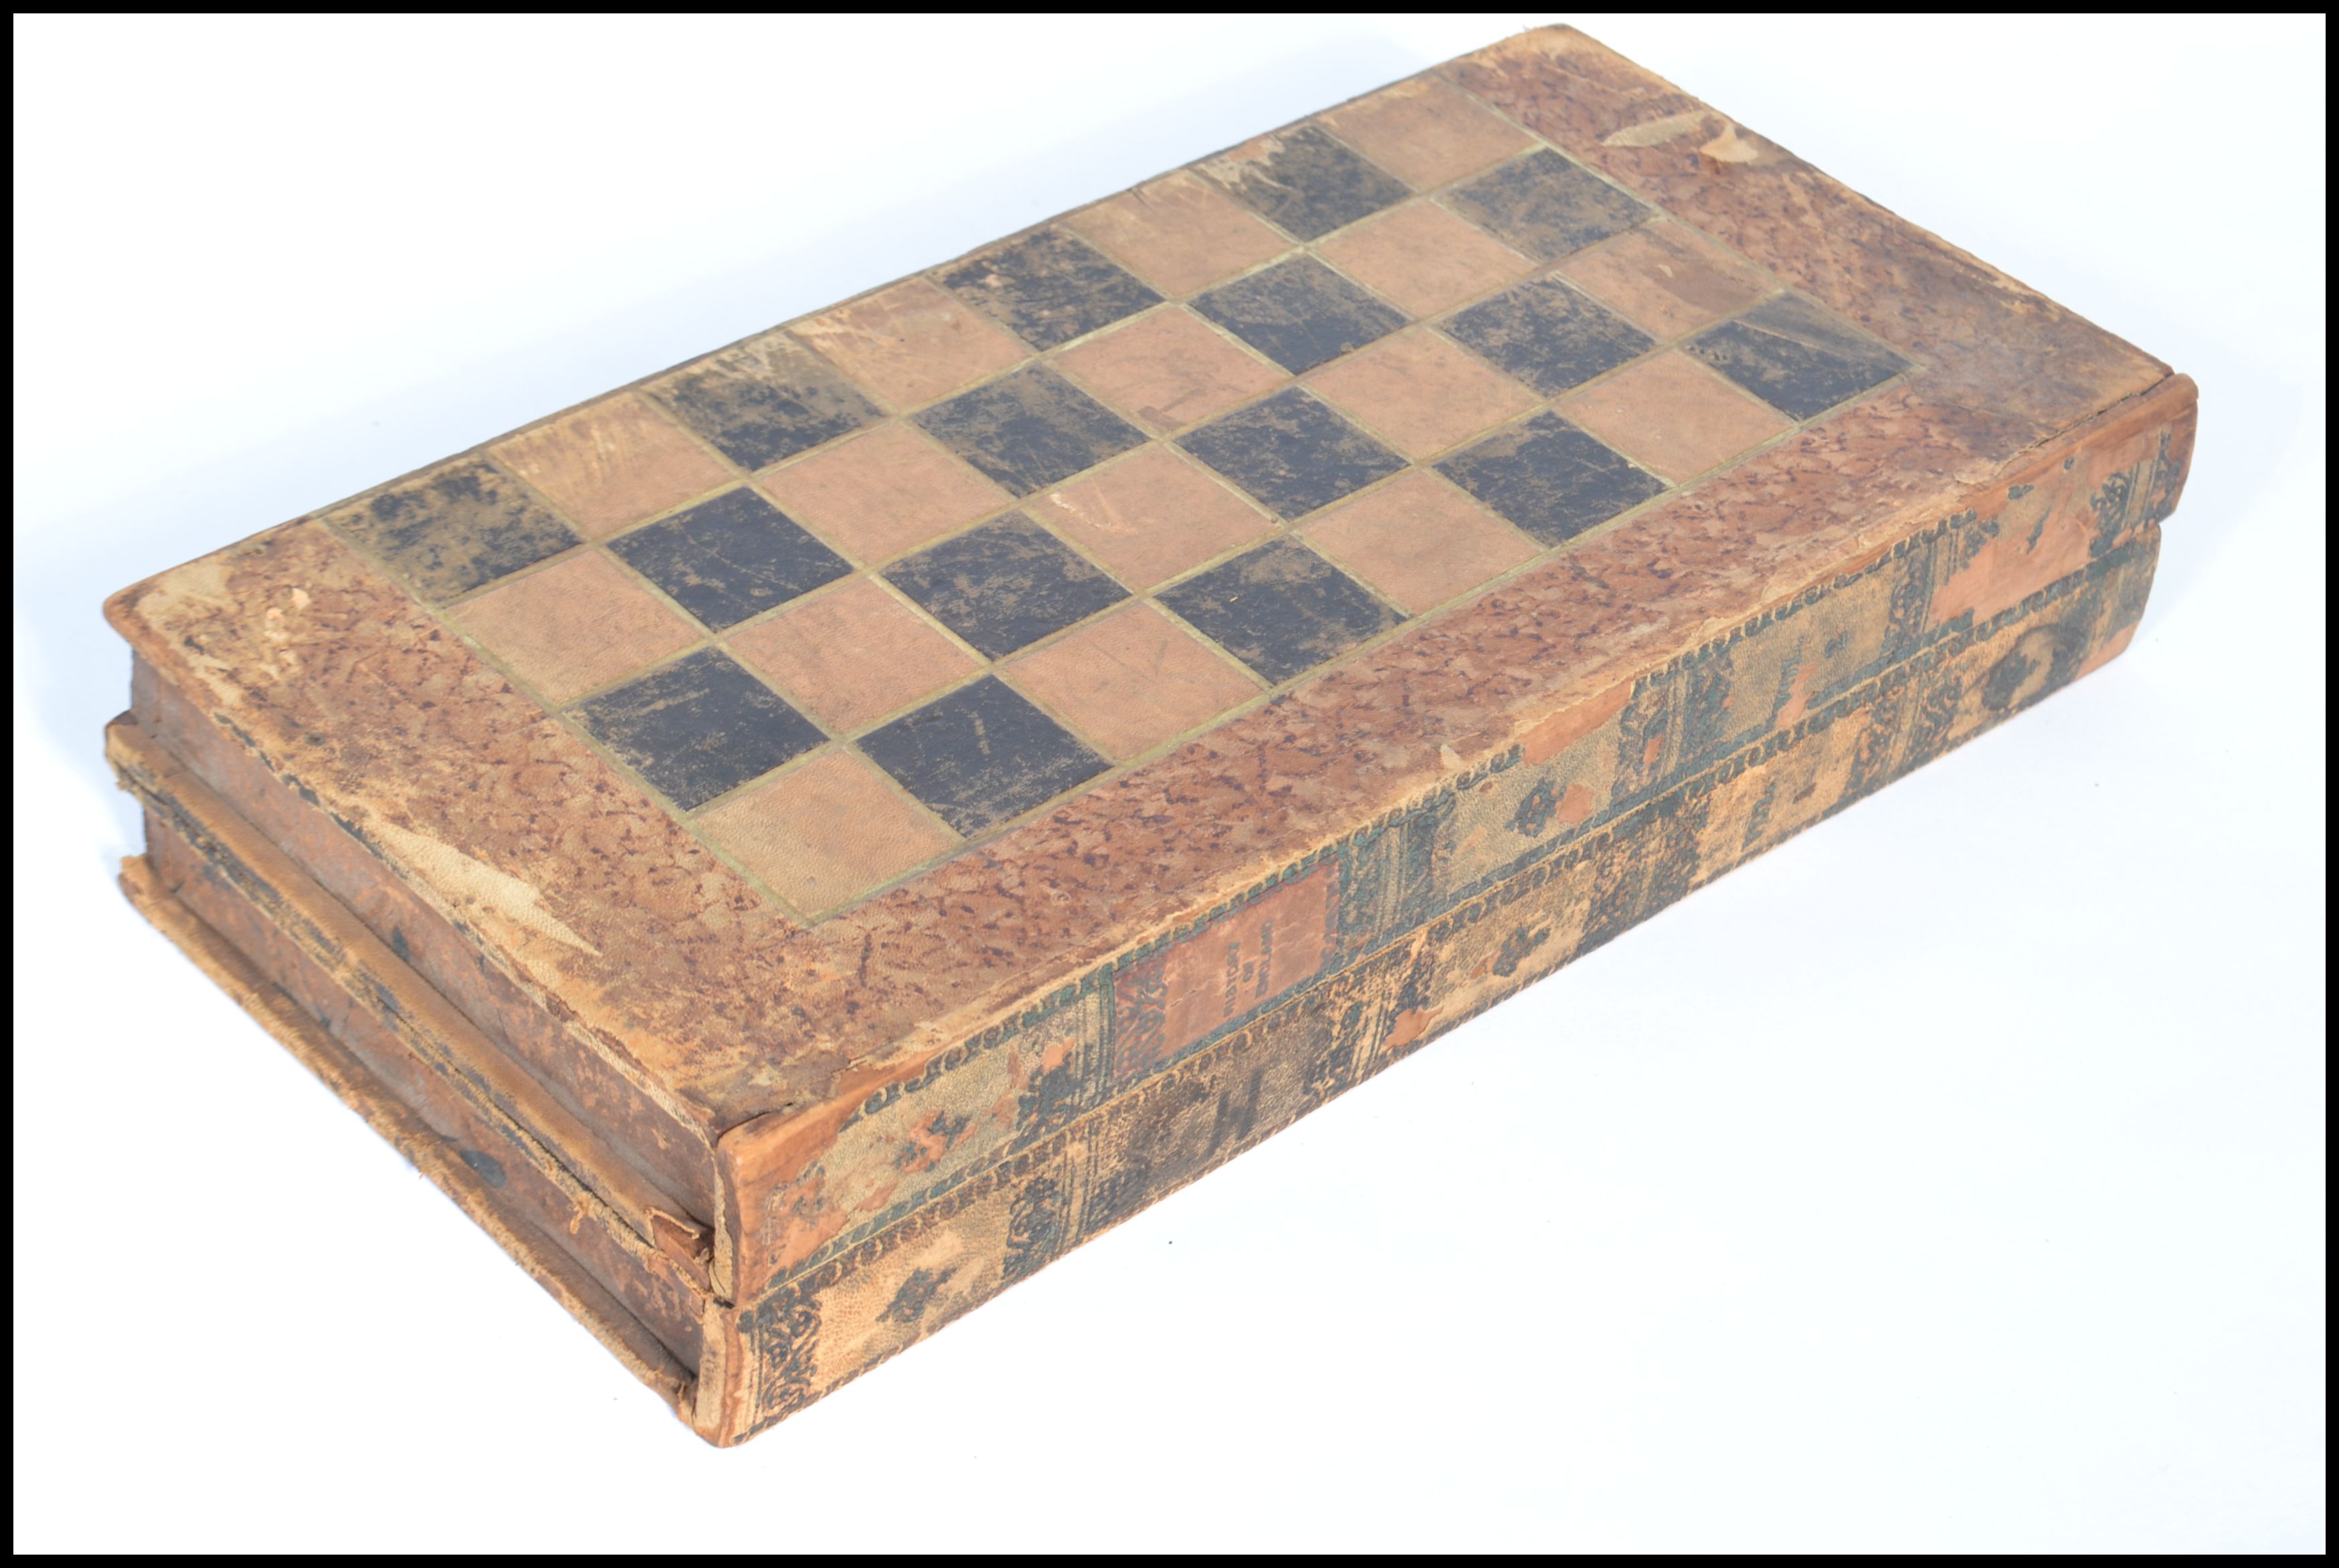 An early 20th century chess board games compendium set containing a draughts set , dice shakers. - Image 3 of 3